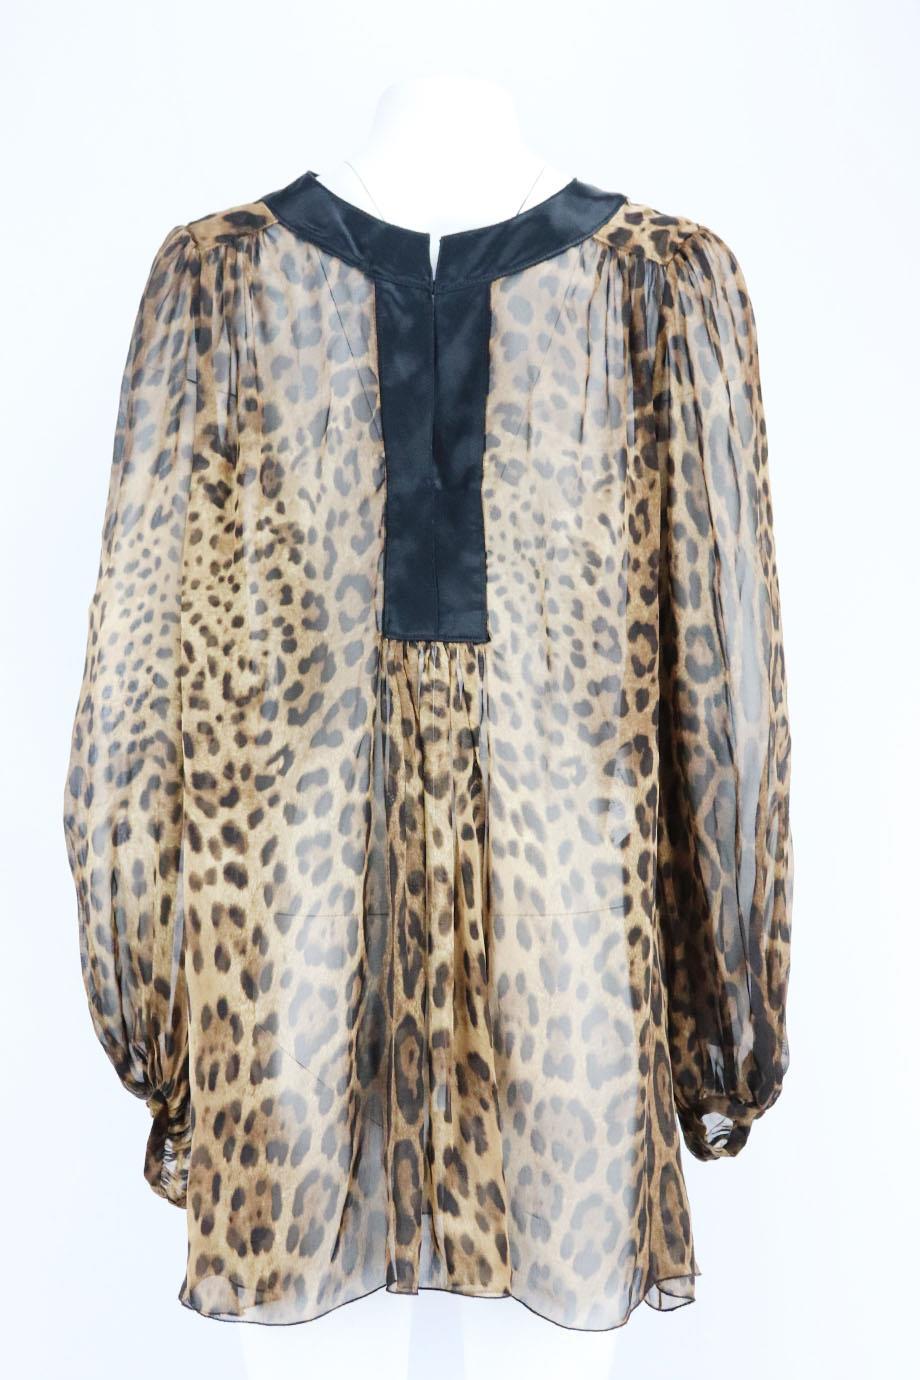 dolce and gabbana leopard blouse